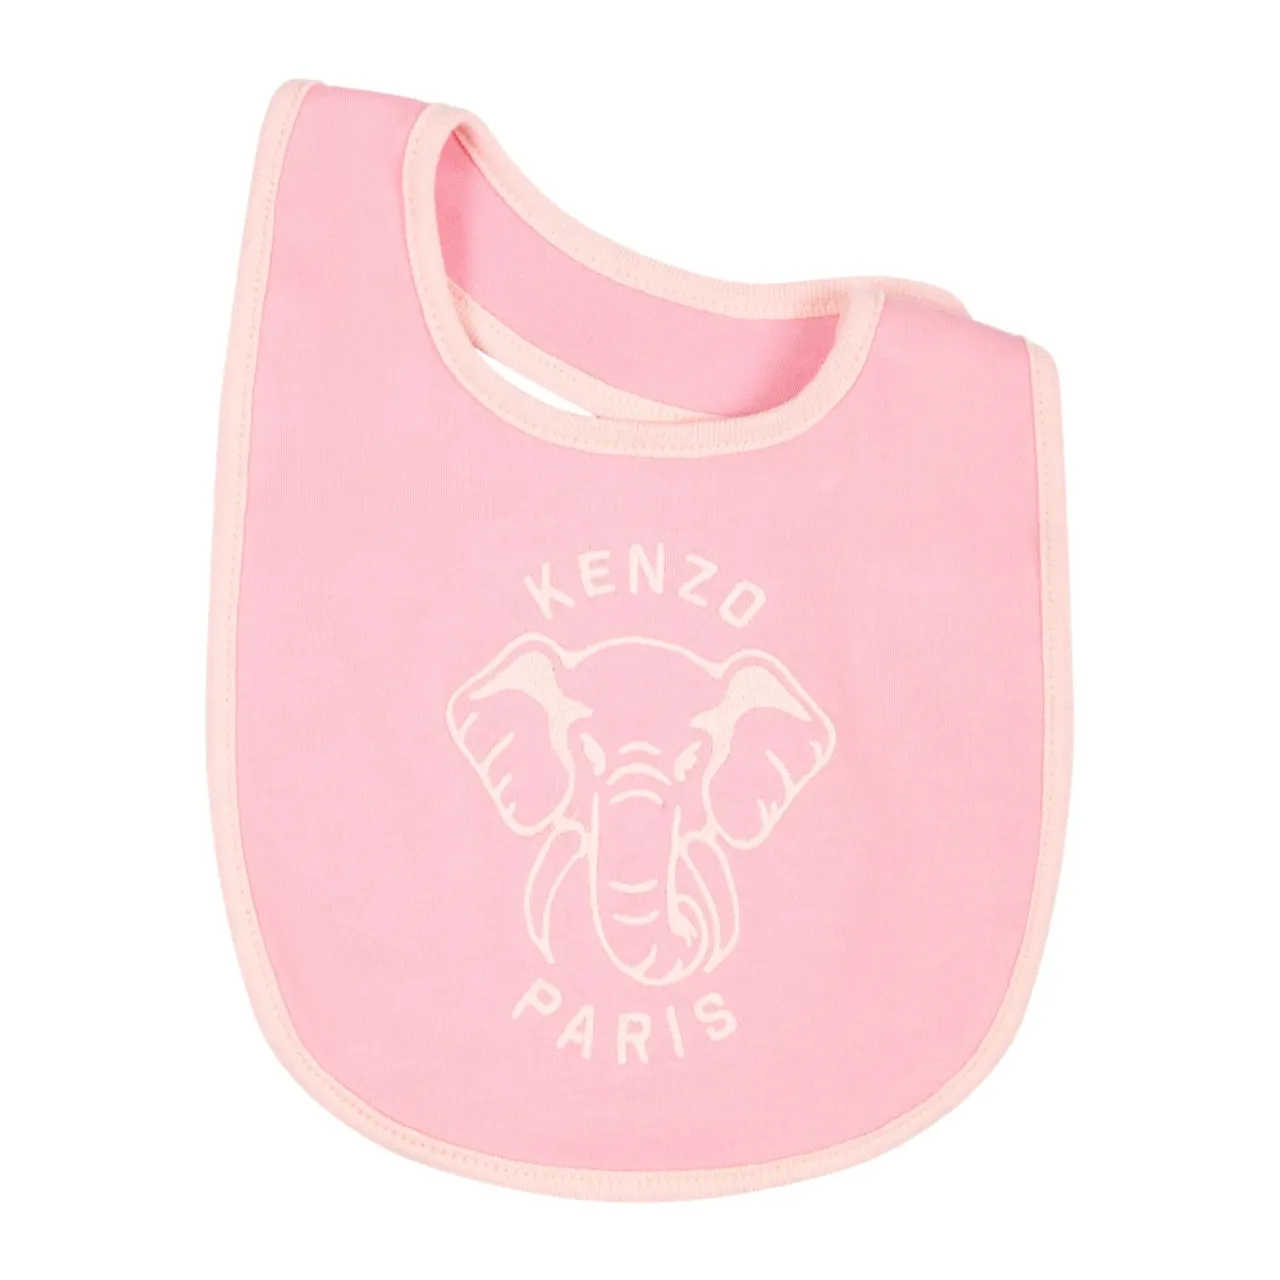 Kenzo , Pink Cotton Rompers Set ,Pink unisex, Sizes: